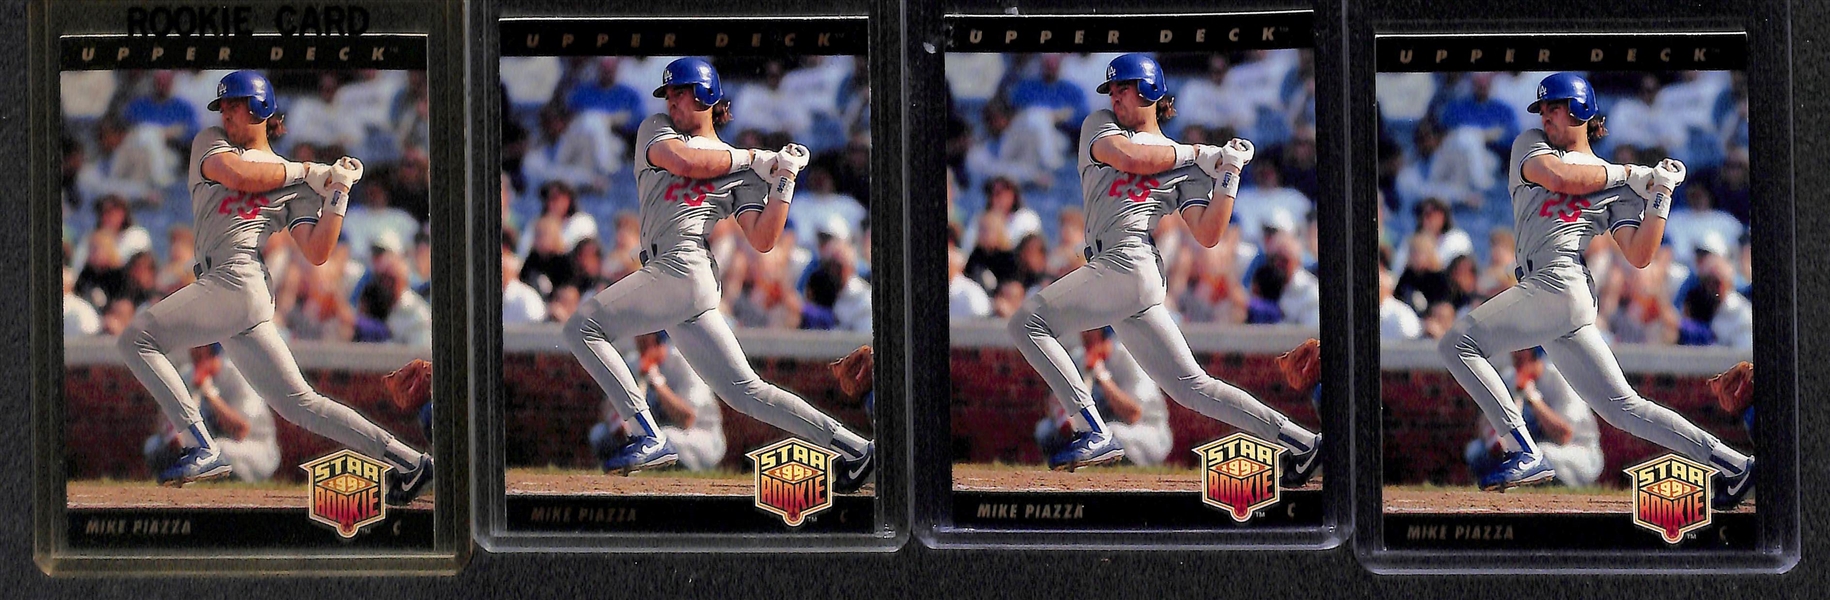 Lot of 28 - 1993 Mike Piazza Rookie Cards